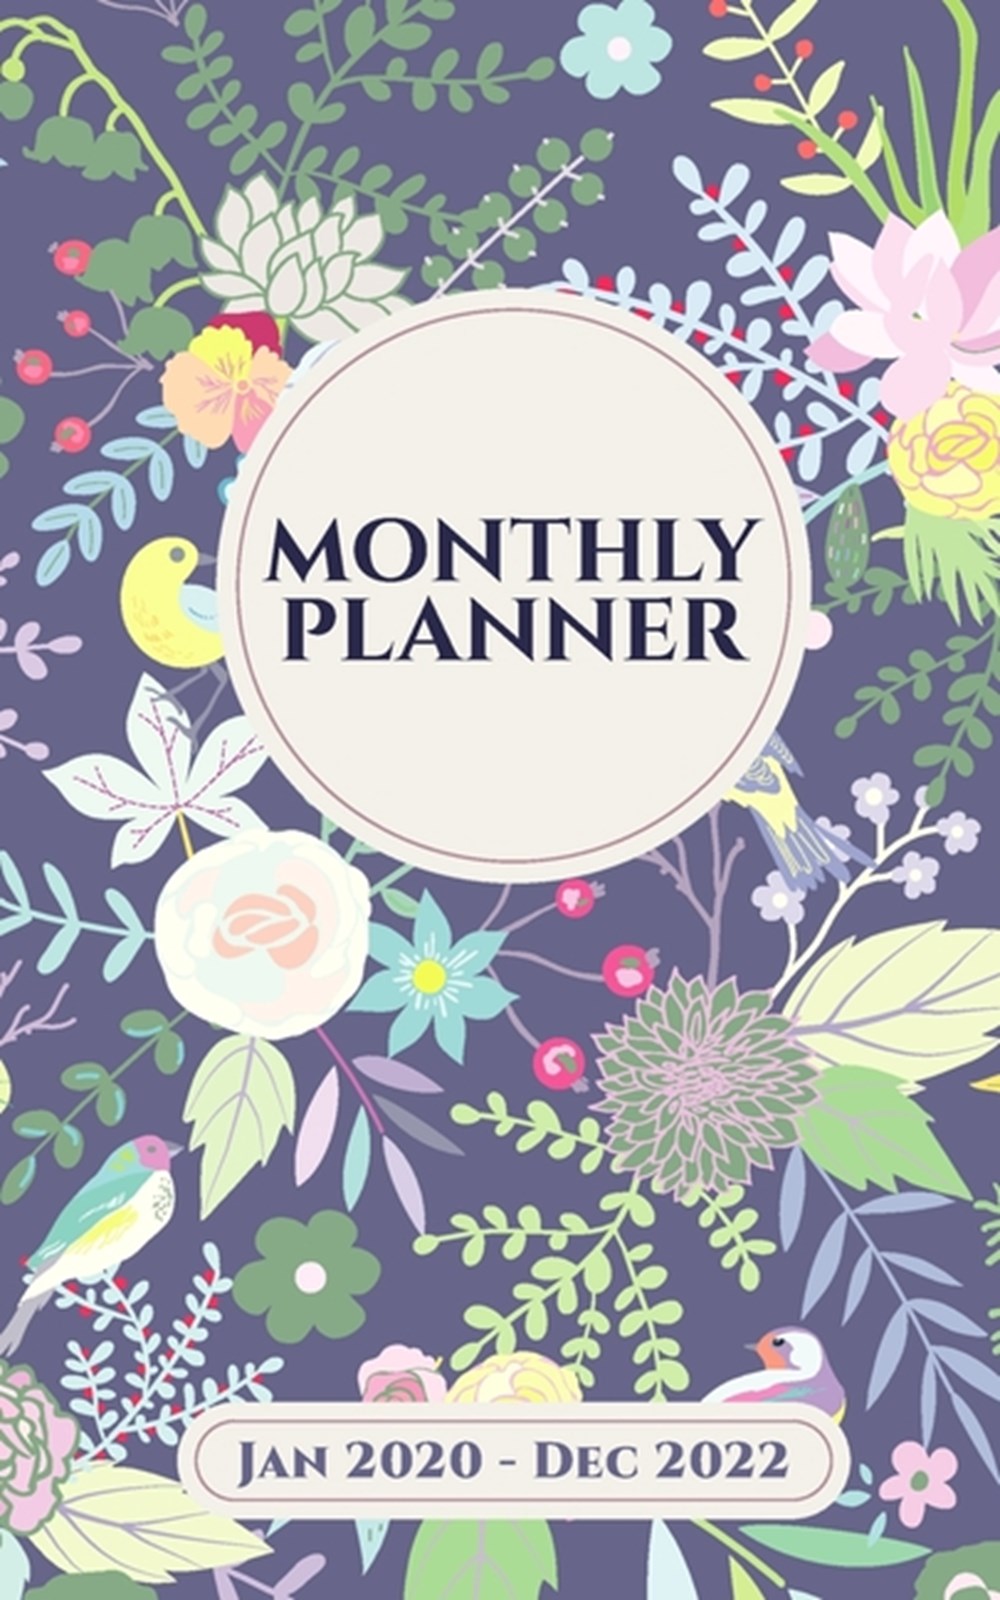 3 Year Monthly Planner and Agenda - January 2020 to December 2022 Pocket Calendar Gift Organizer for